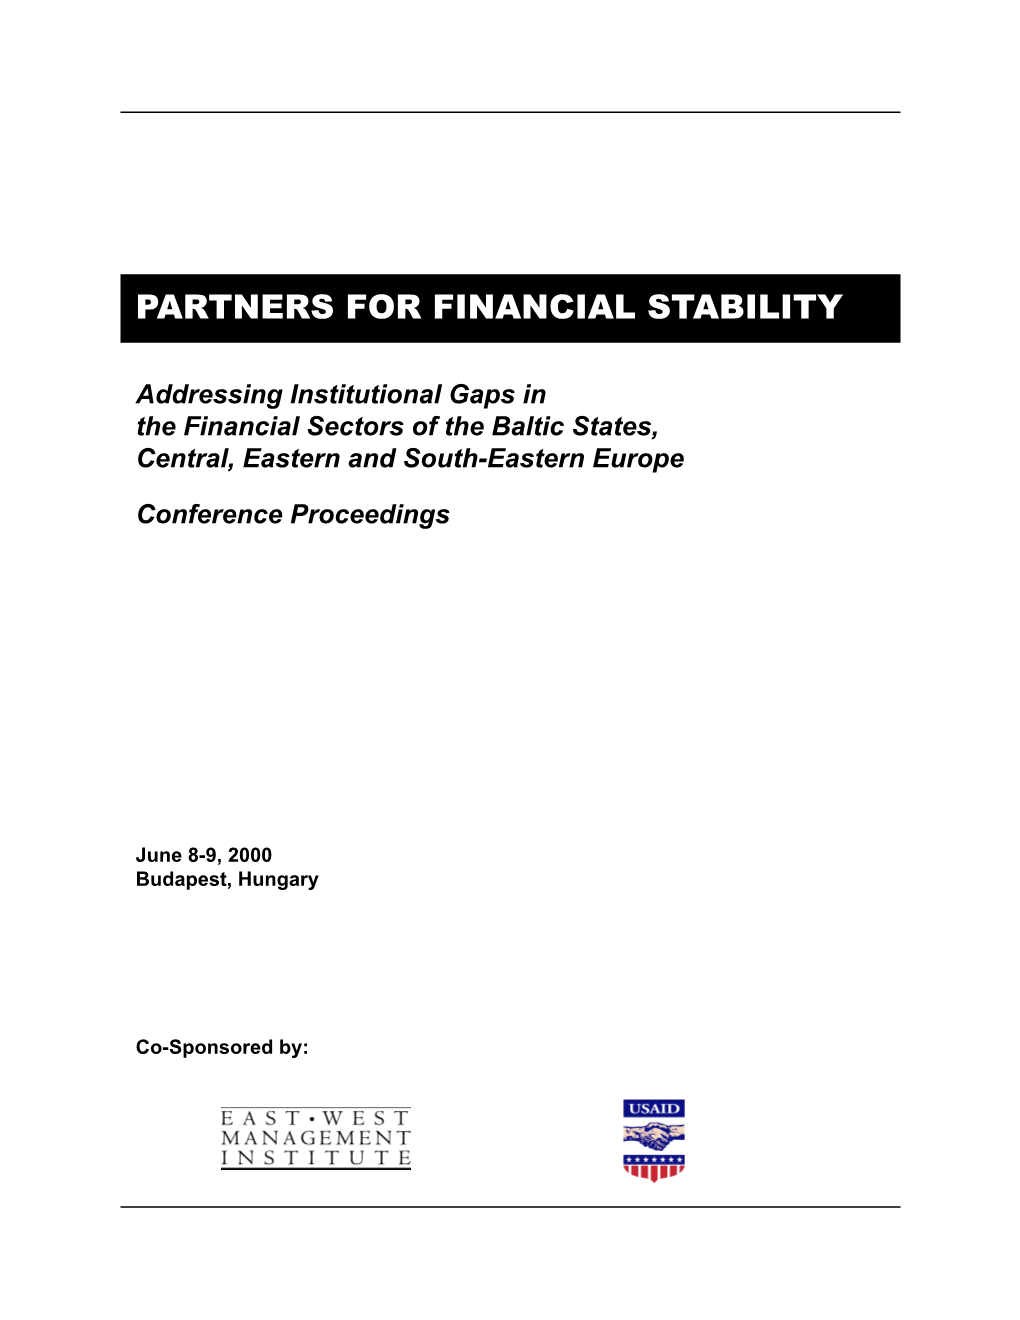 Partners for Financial Stability